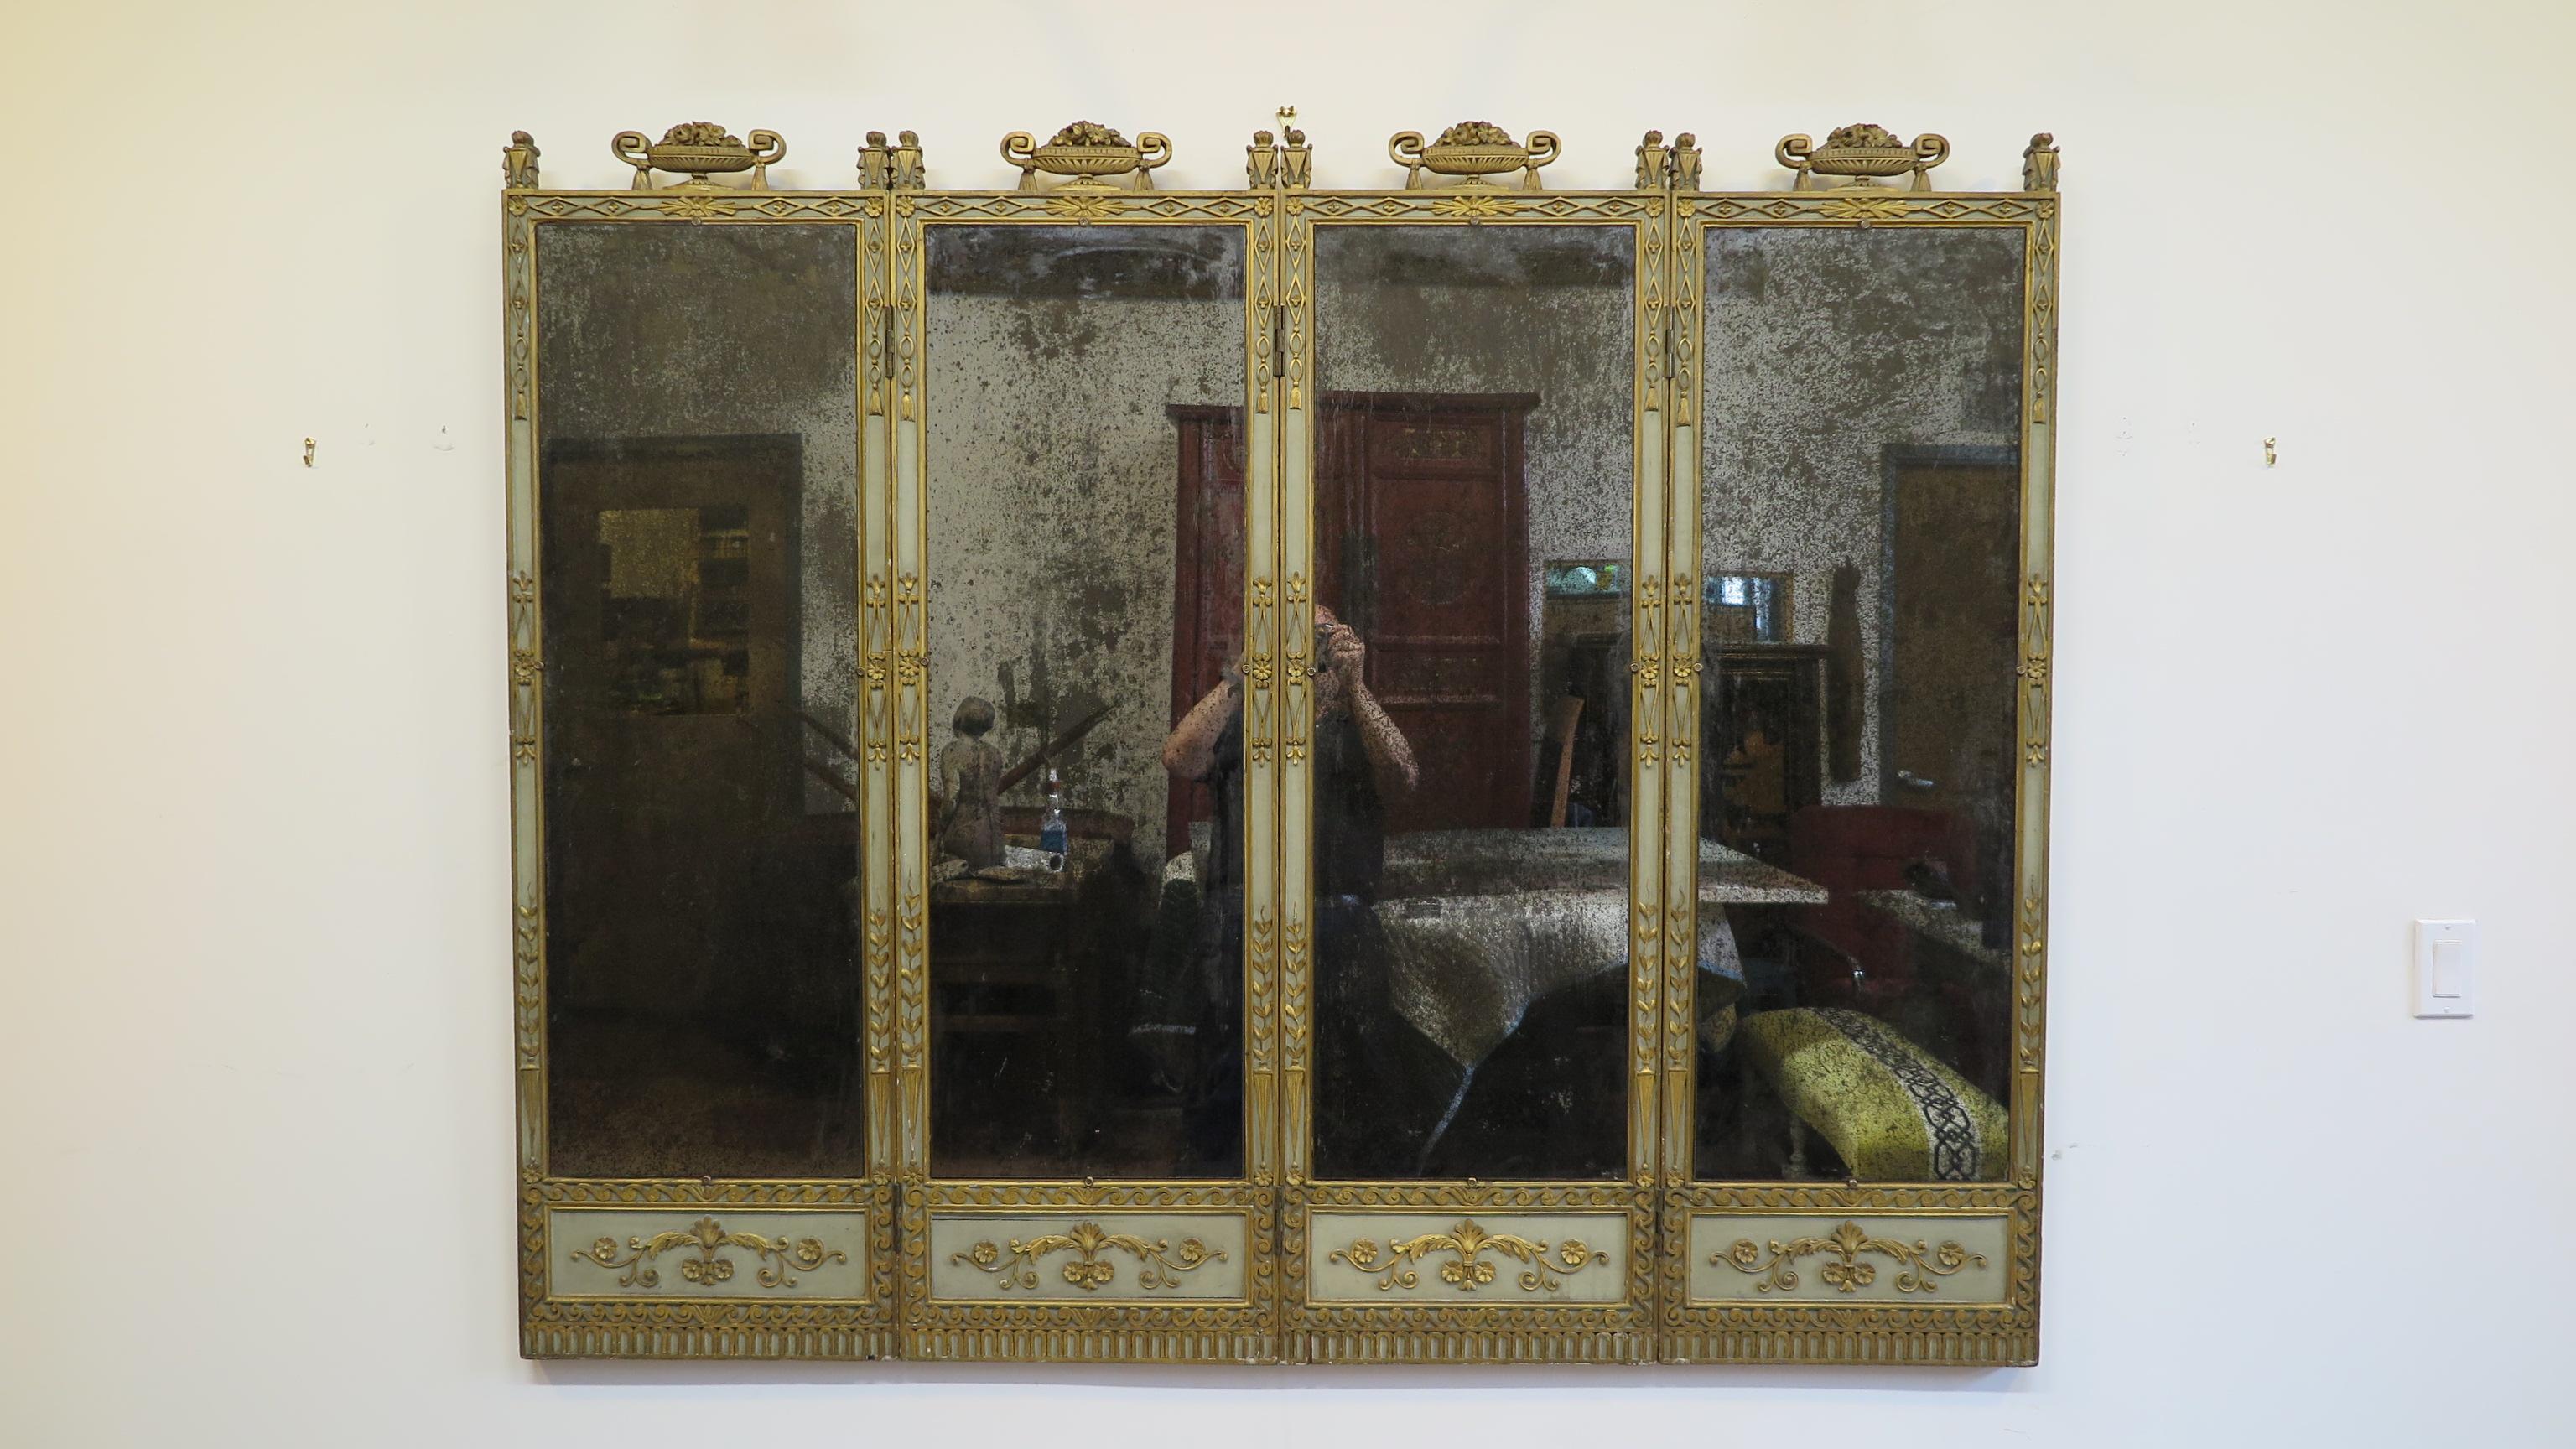 A 19th century Italian mirror panel. 19th century panel screen mirror. Four Paneled screens of carved, painted, and gilded gesso over wood. Each section eloquently adorned surmounted by flower filled flaming burst Tureens over a rectangular frame